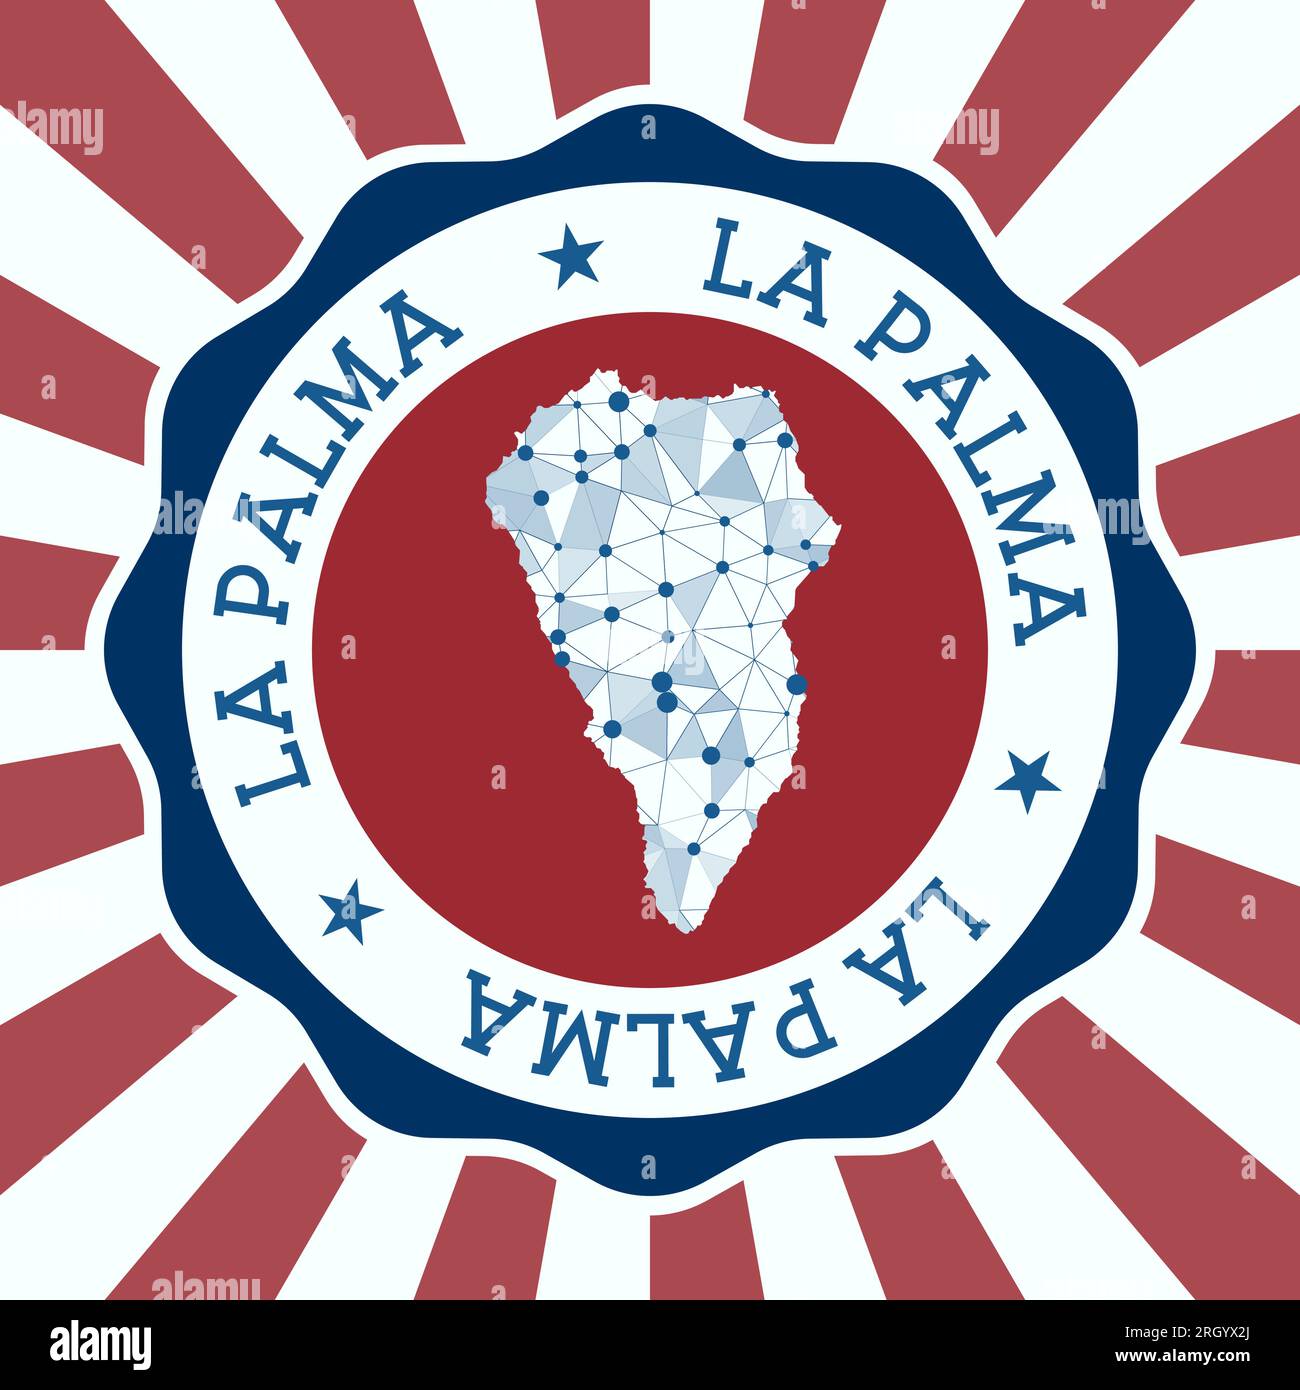 La Palma Badge. Round logo of island with triangular mesh map and radial rays. EPS10 Vector. Stock Vector